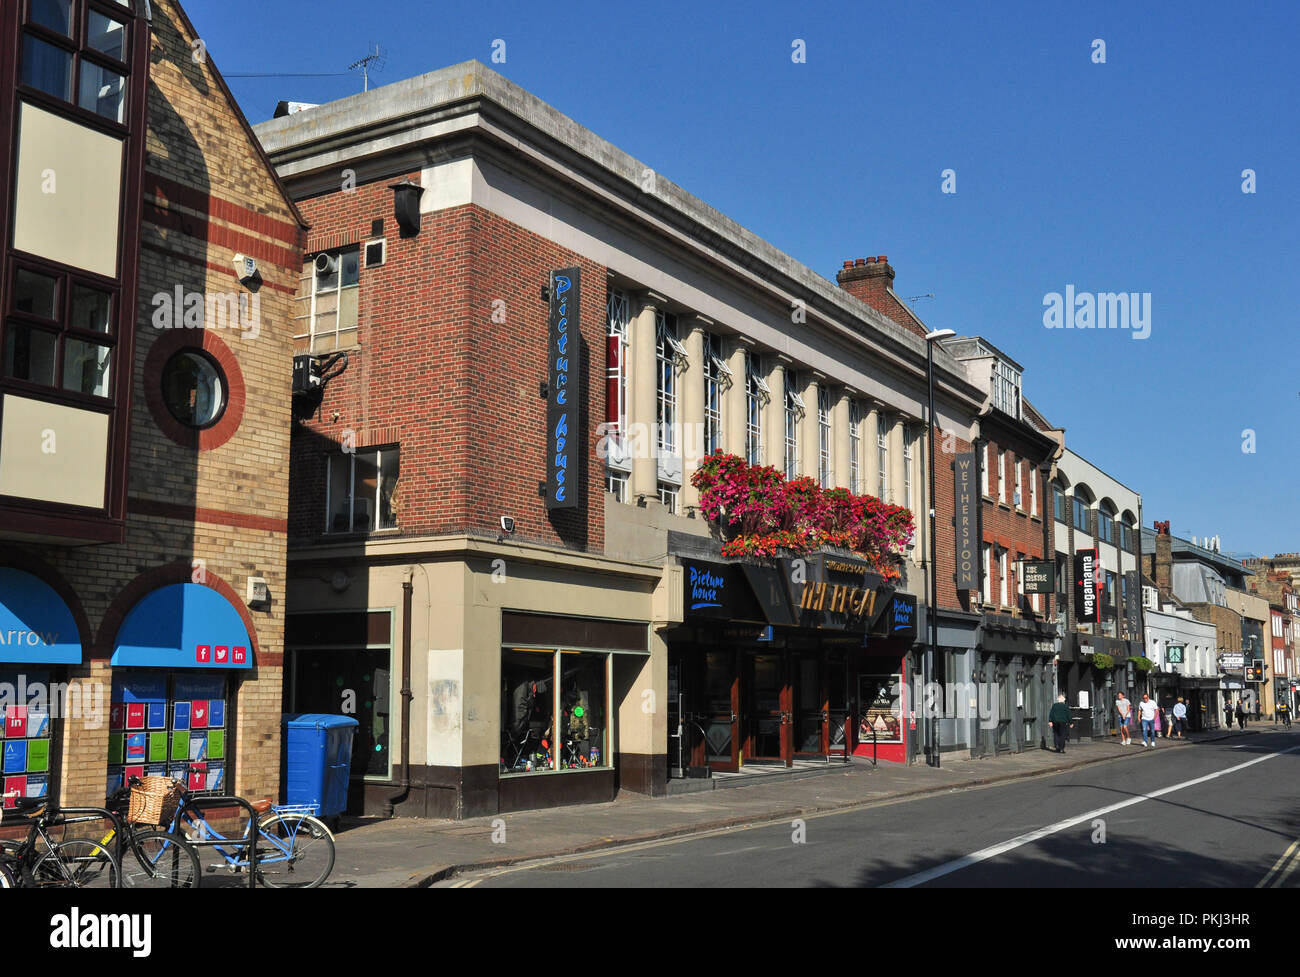 Pubs, restaurants and picture house, St Andrew's Street, Cambridge, England, UK Stock Photo